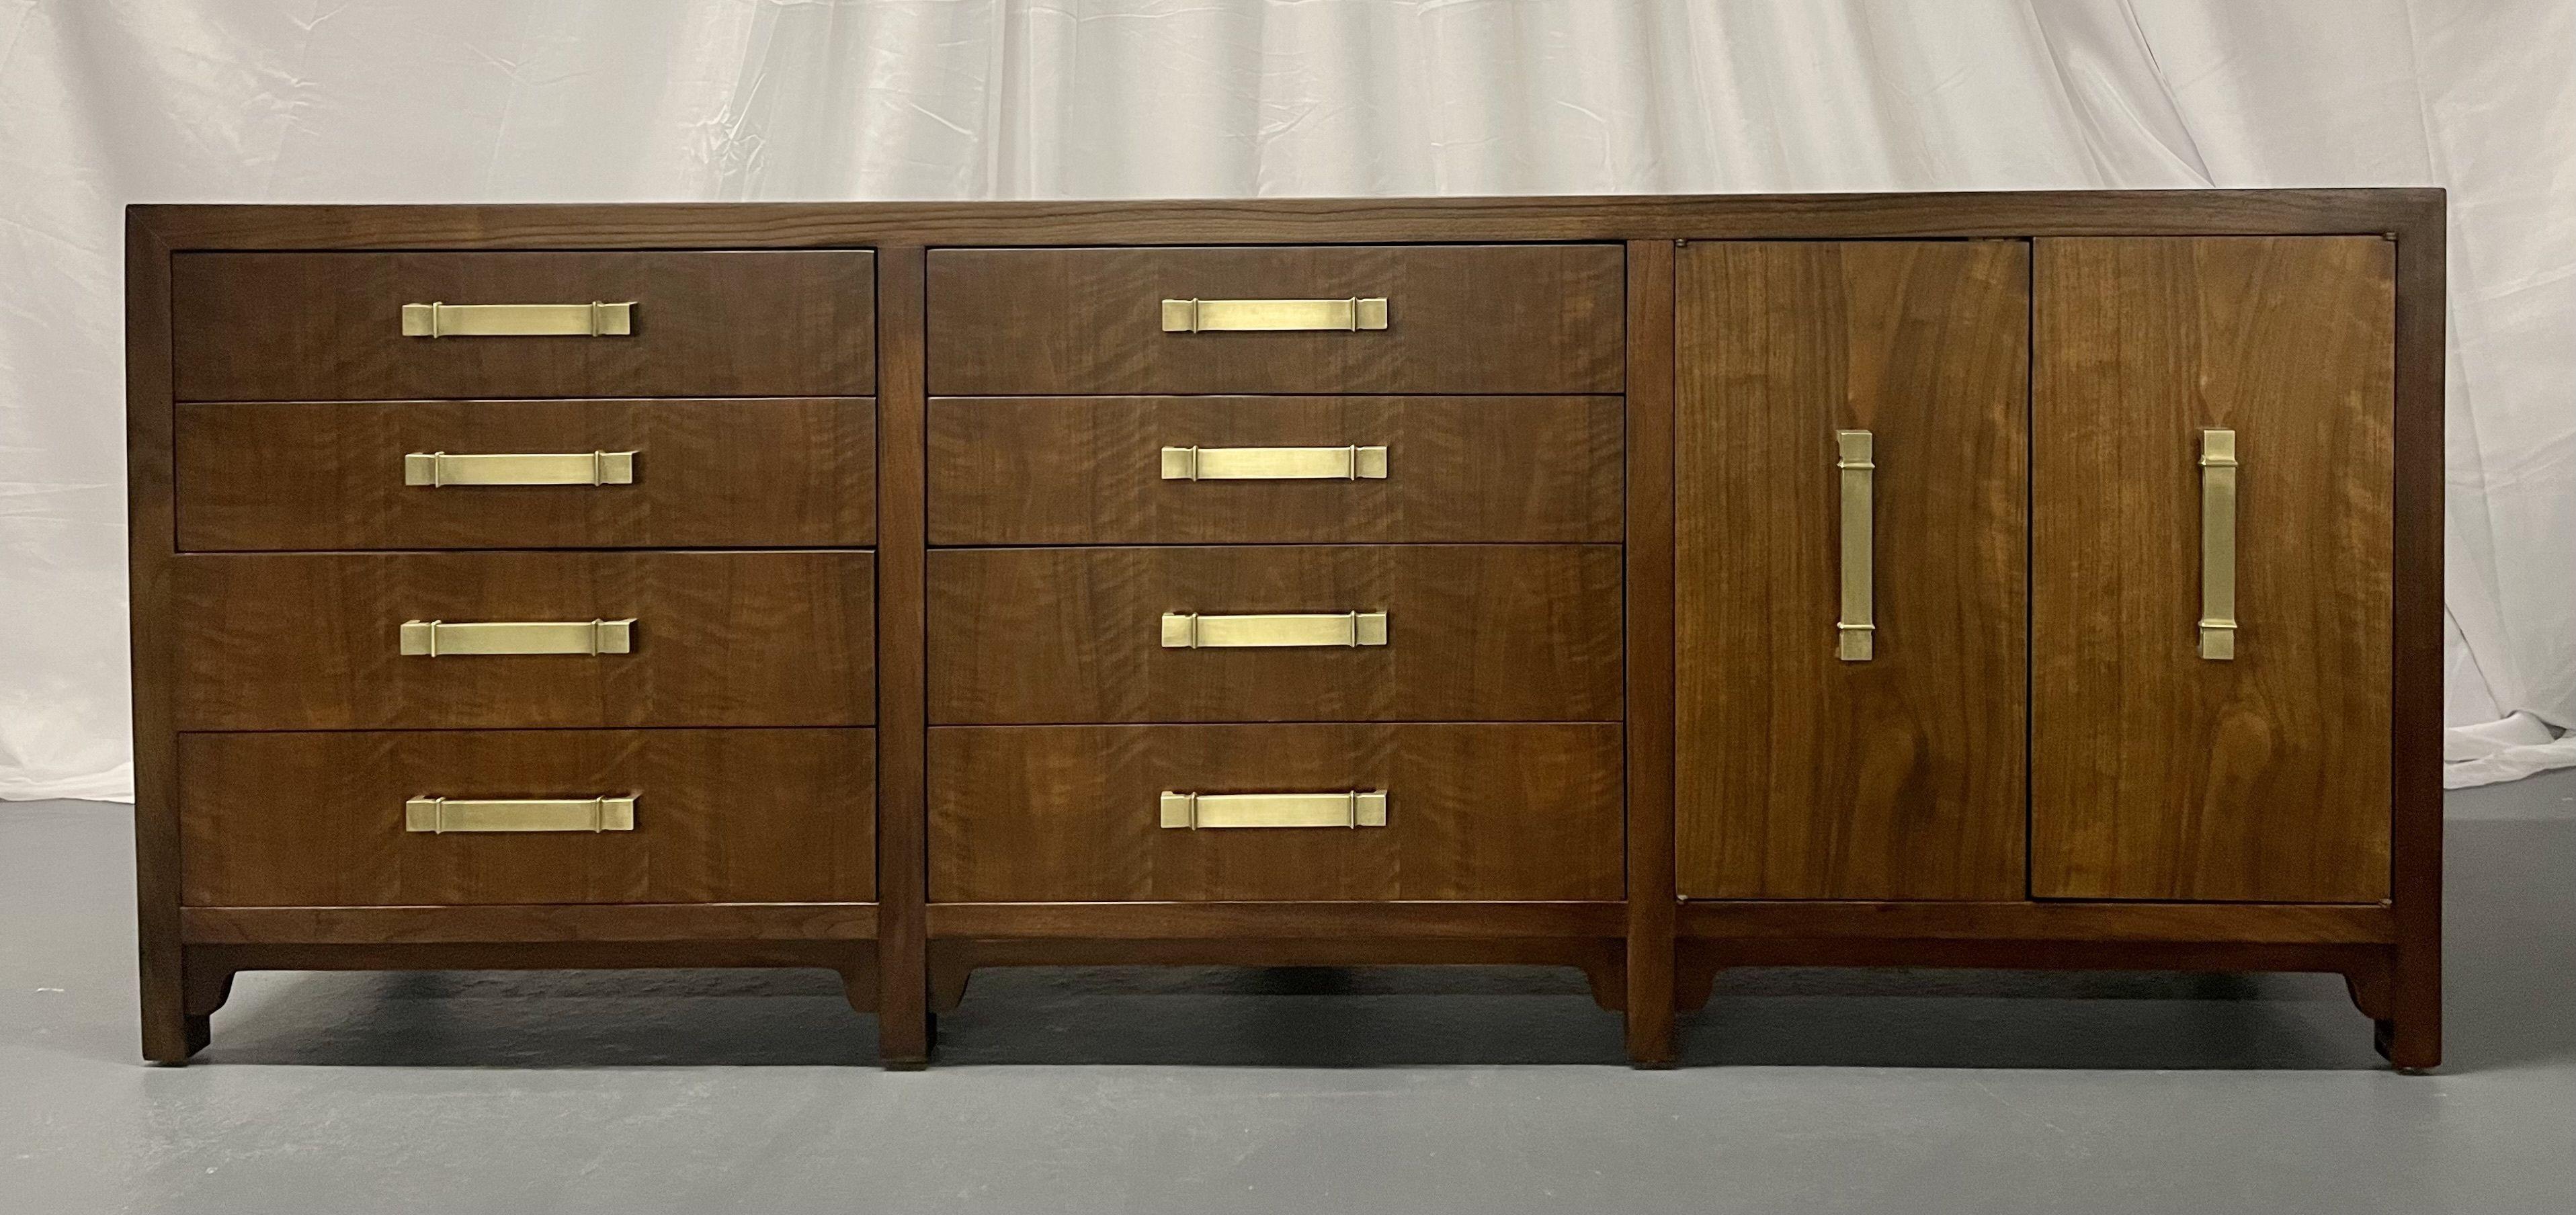 Mid-Century Modern dresser/sideboard, American Designer, walnut, brass accents.

Mid-Century storage cabinet made of solid walnut having newly cleaned brass drawer pulls. This piece is not only beautiful, but also functional, fit with 10 total